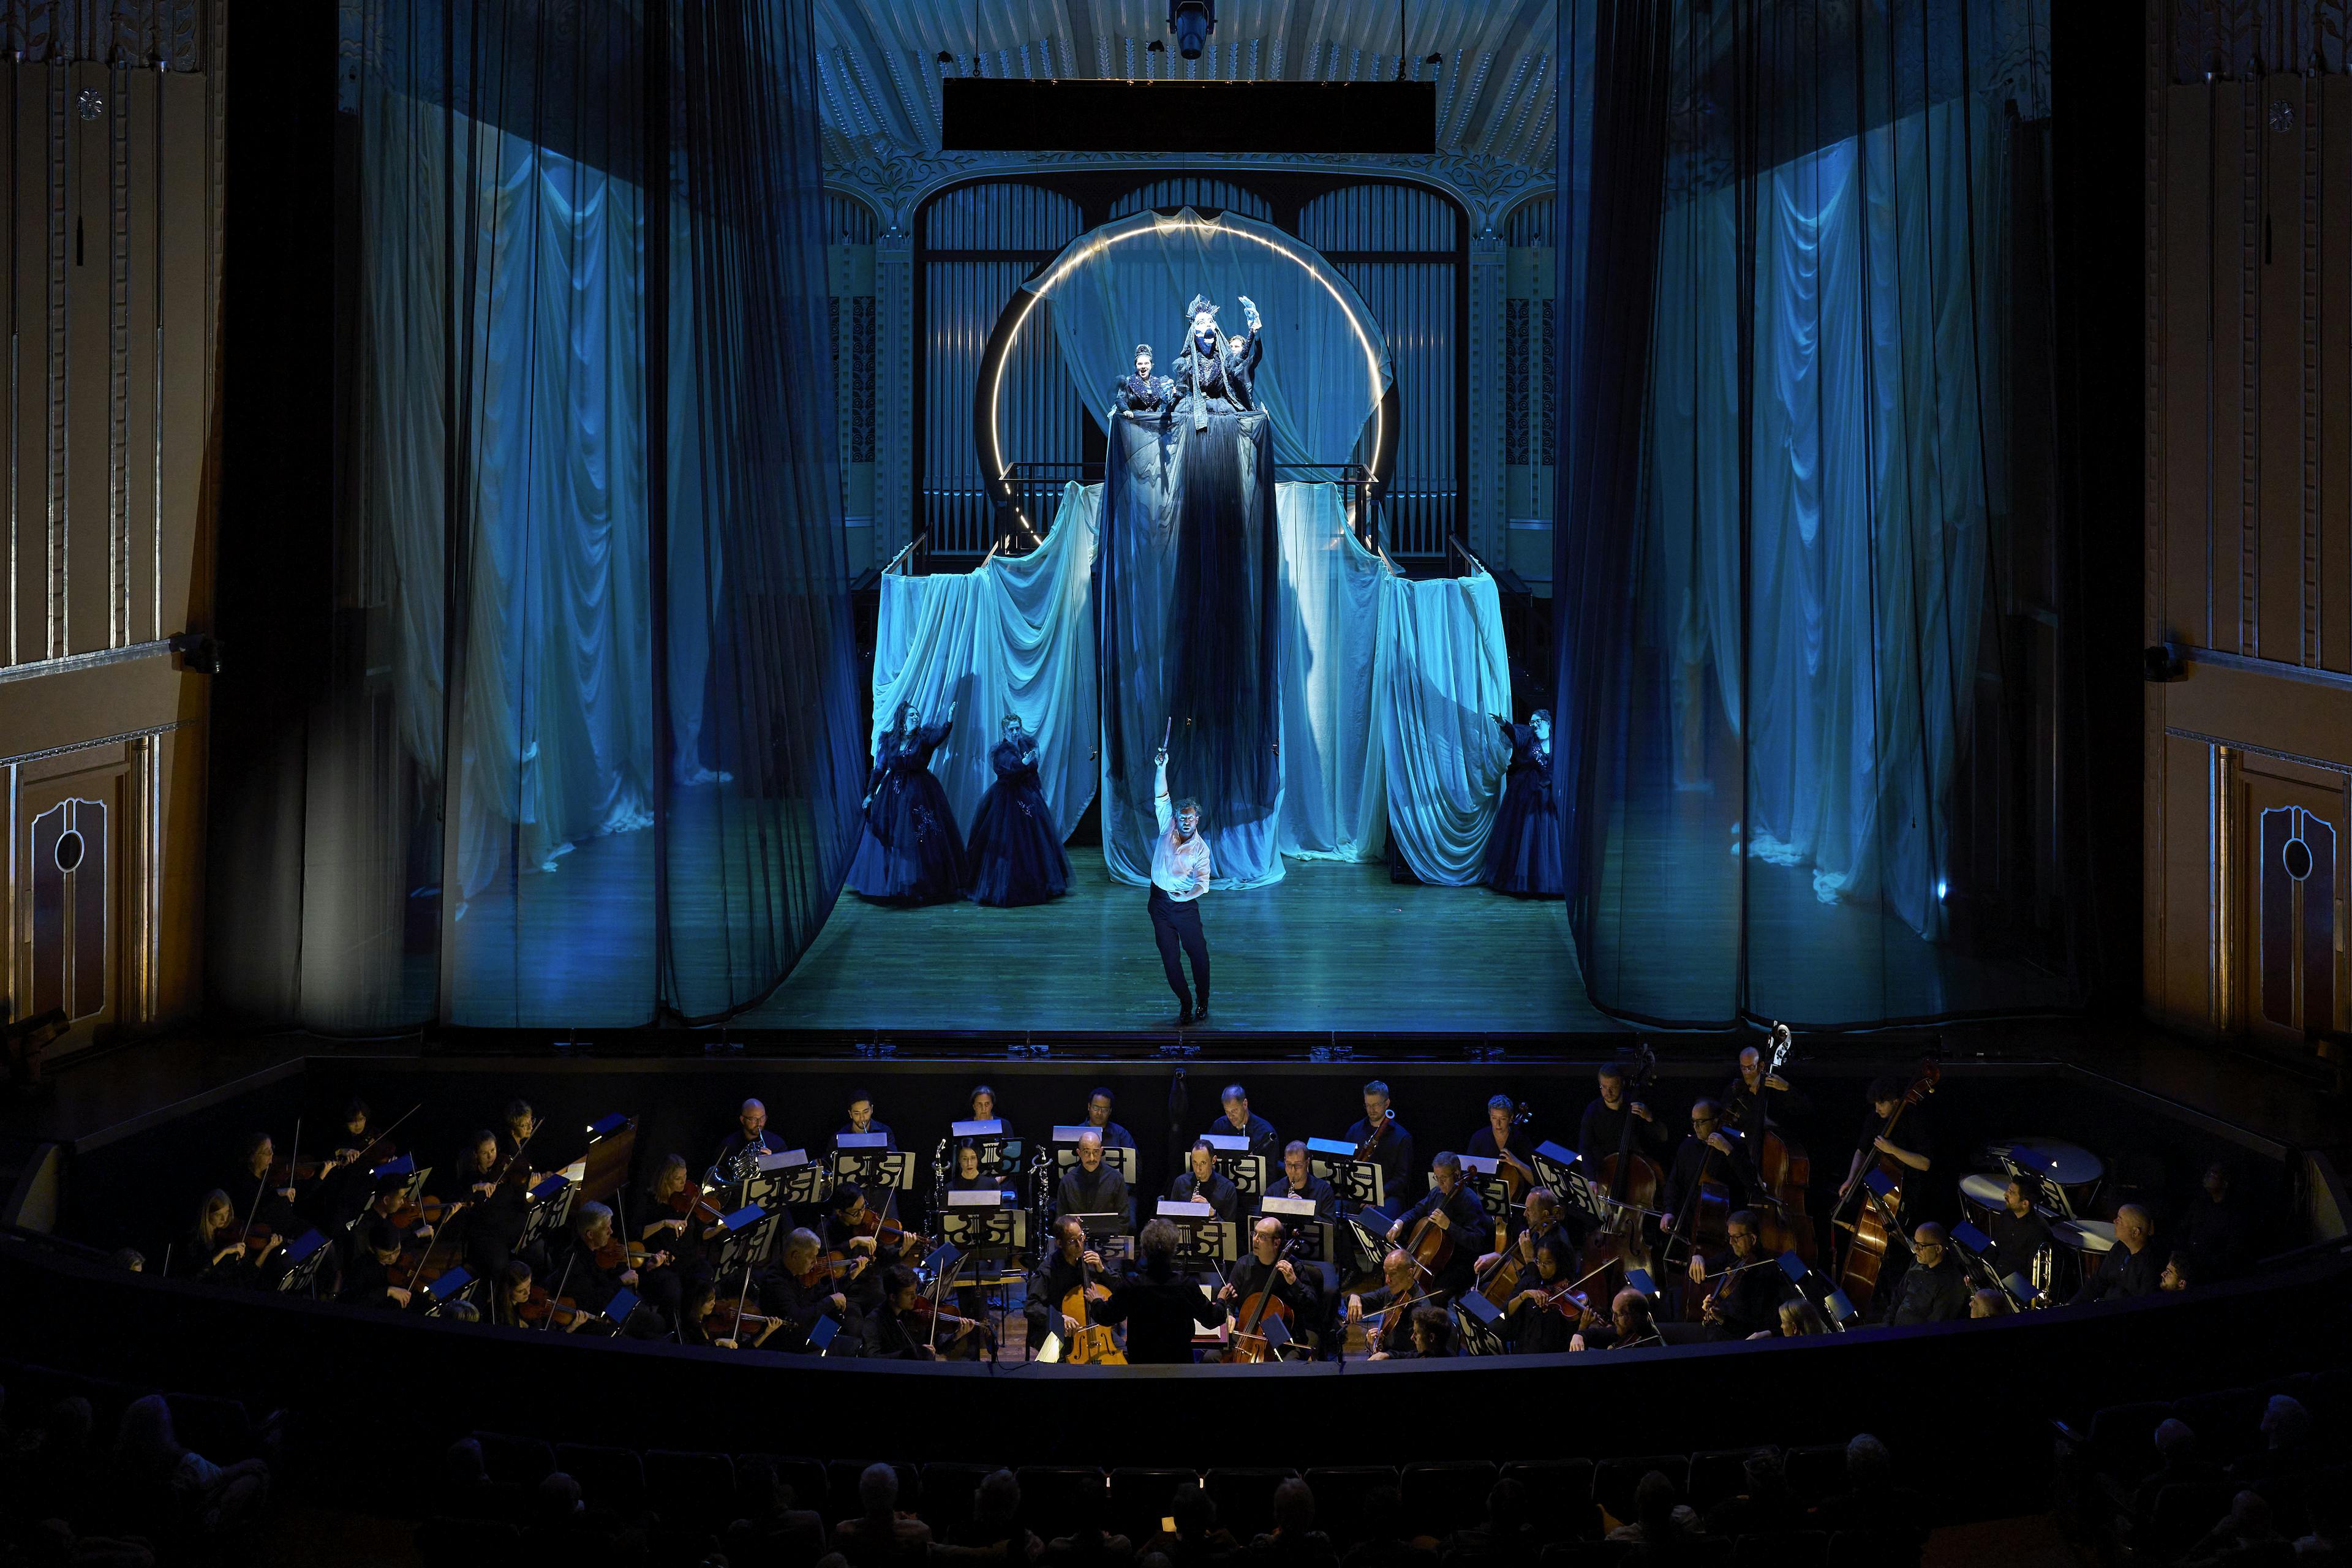 Stage with performers and an orchestra